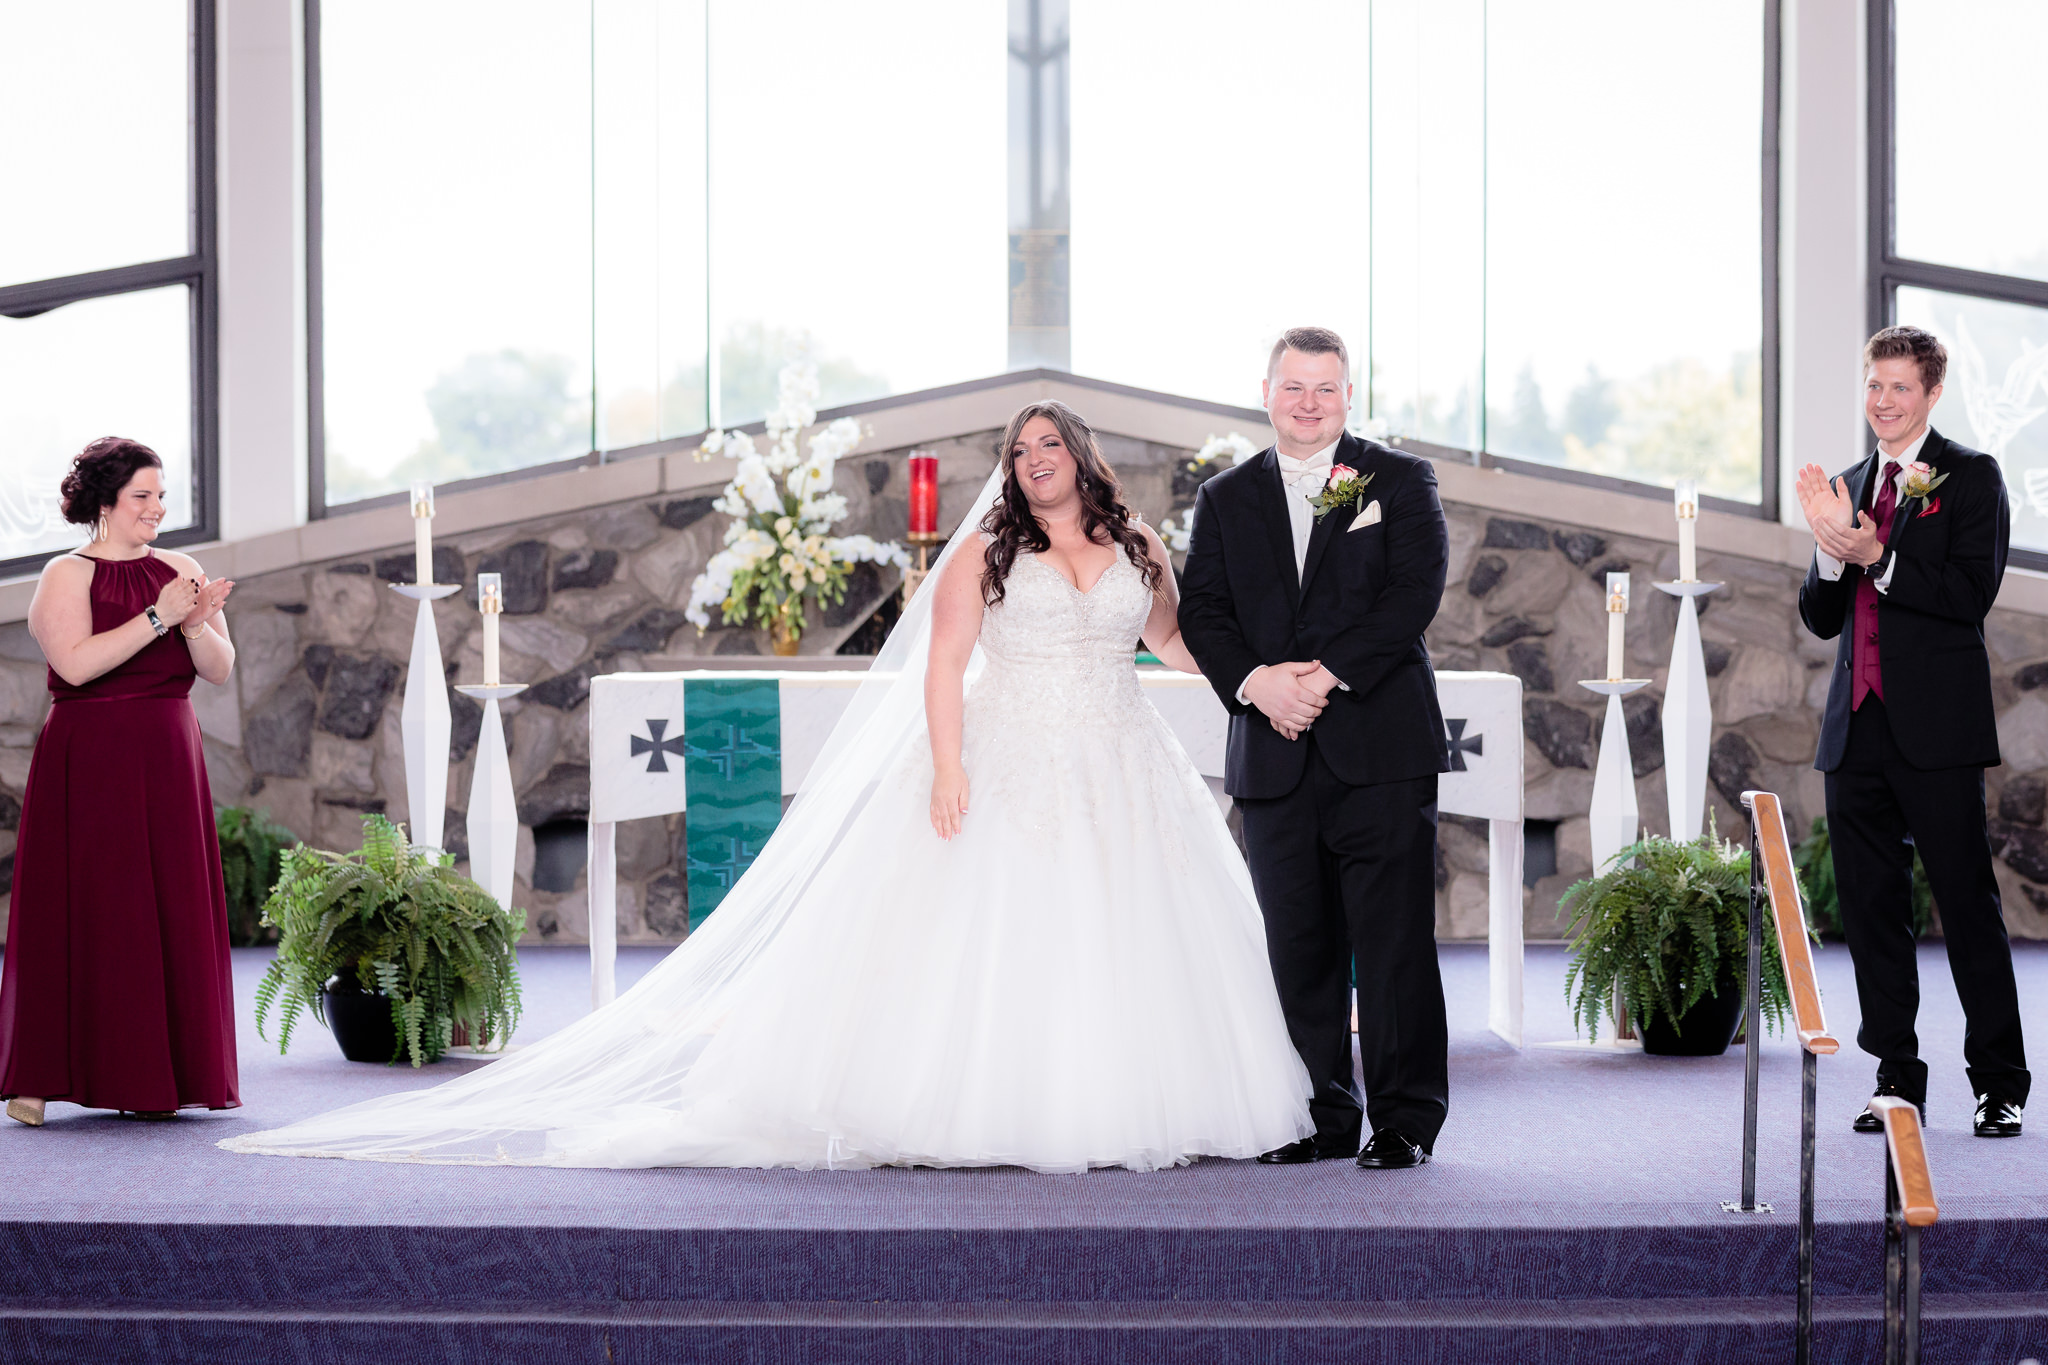 The new Mr. & Mrs. are announced at a St. Malachy wedding ceremony